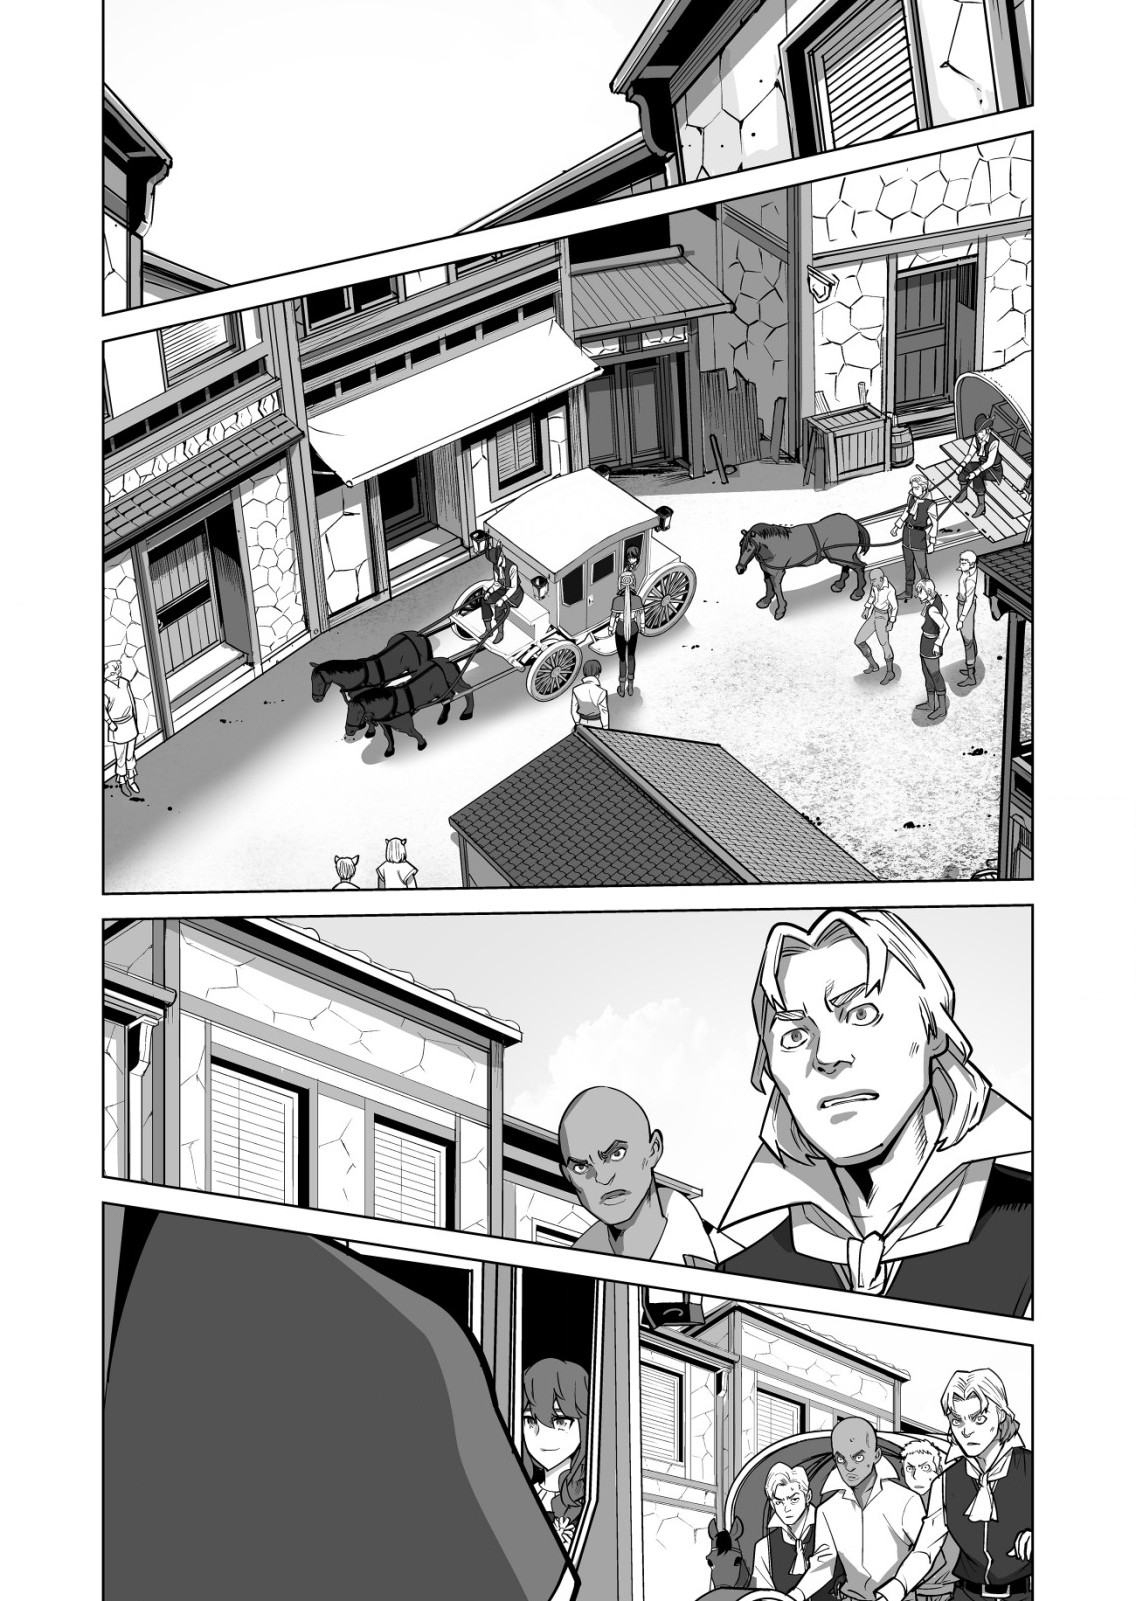 A Man with a Thousand Skills 1000 - Chapter 67.1 - Page 1